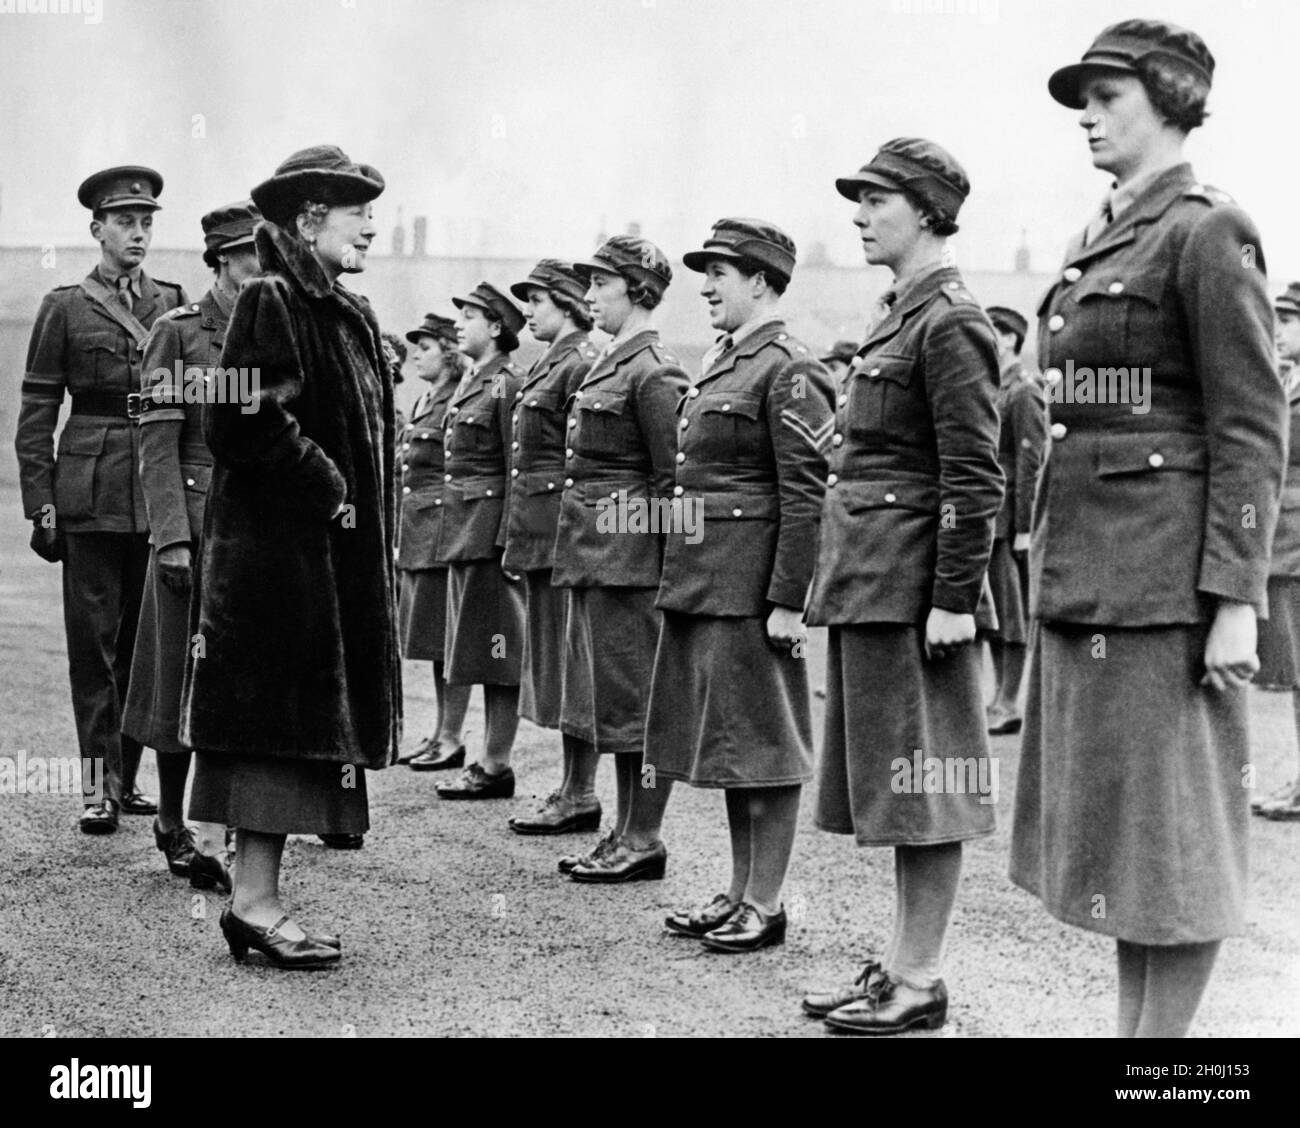 Anne Chamberlain, wife of Prime Minister Neville Chamberlain, visits troops of the British Army's Women's Auxiliary. [automated translation] Stock Photo